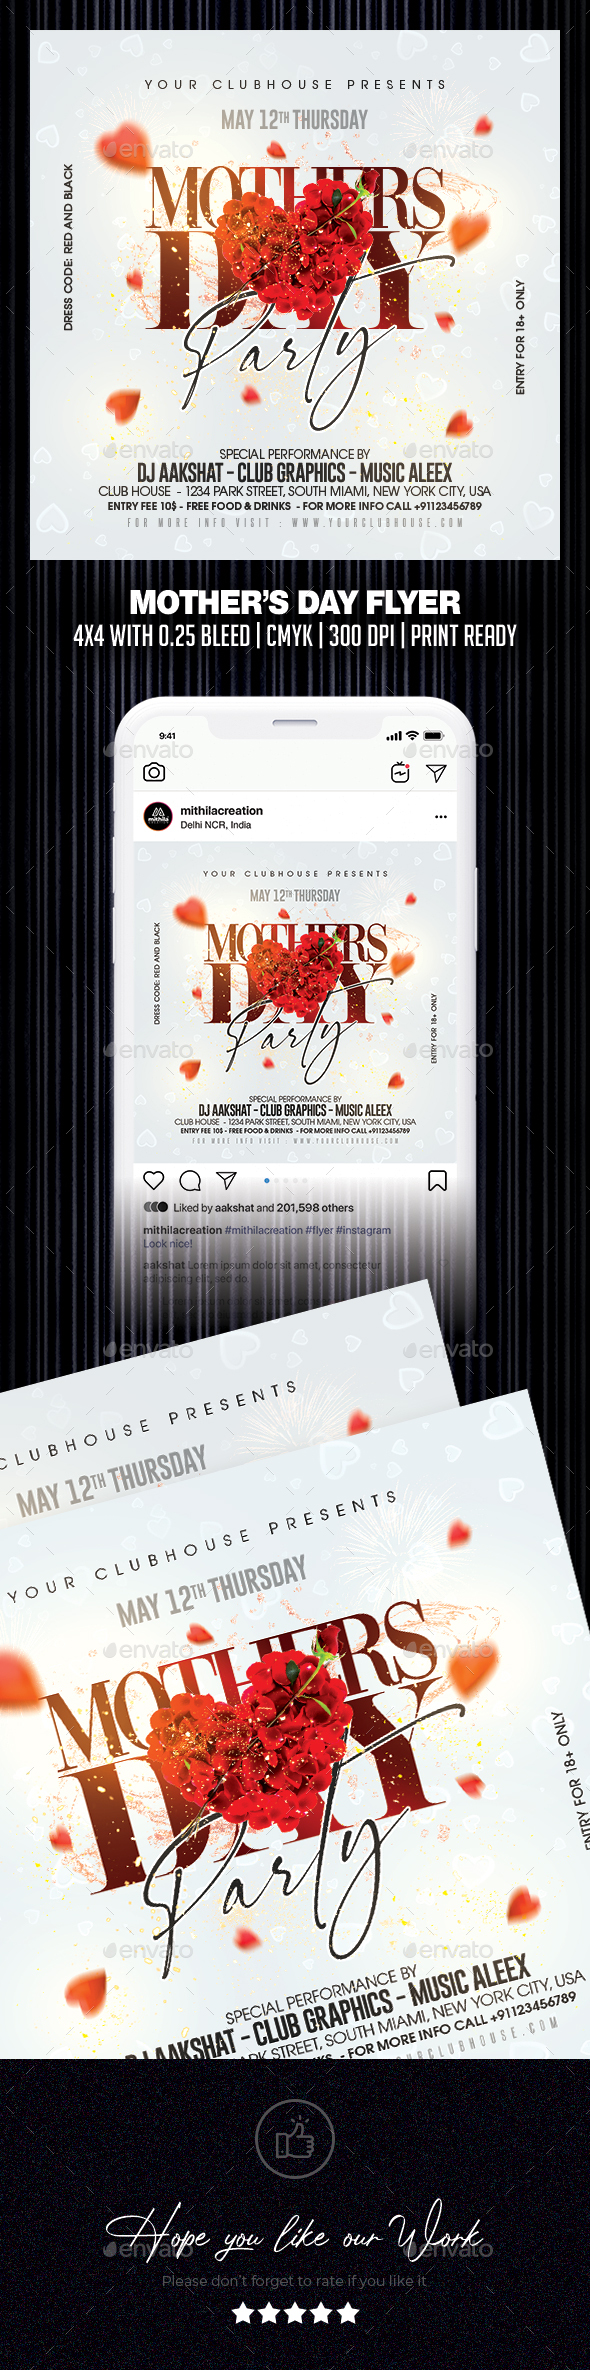 [DOWNLOAD]Mothers Day Flyer